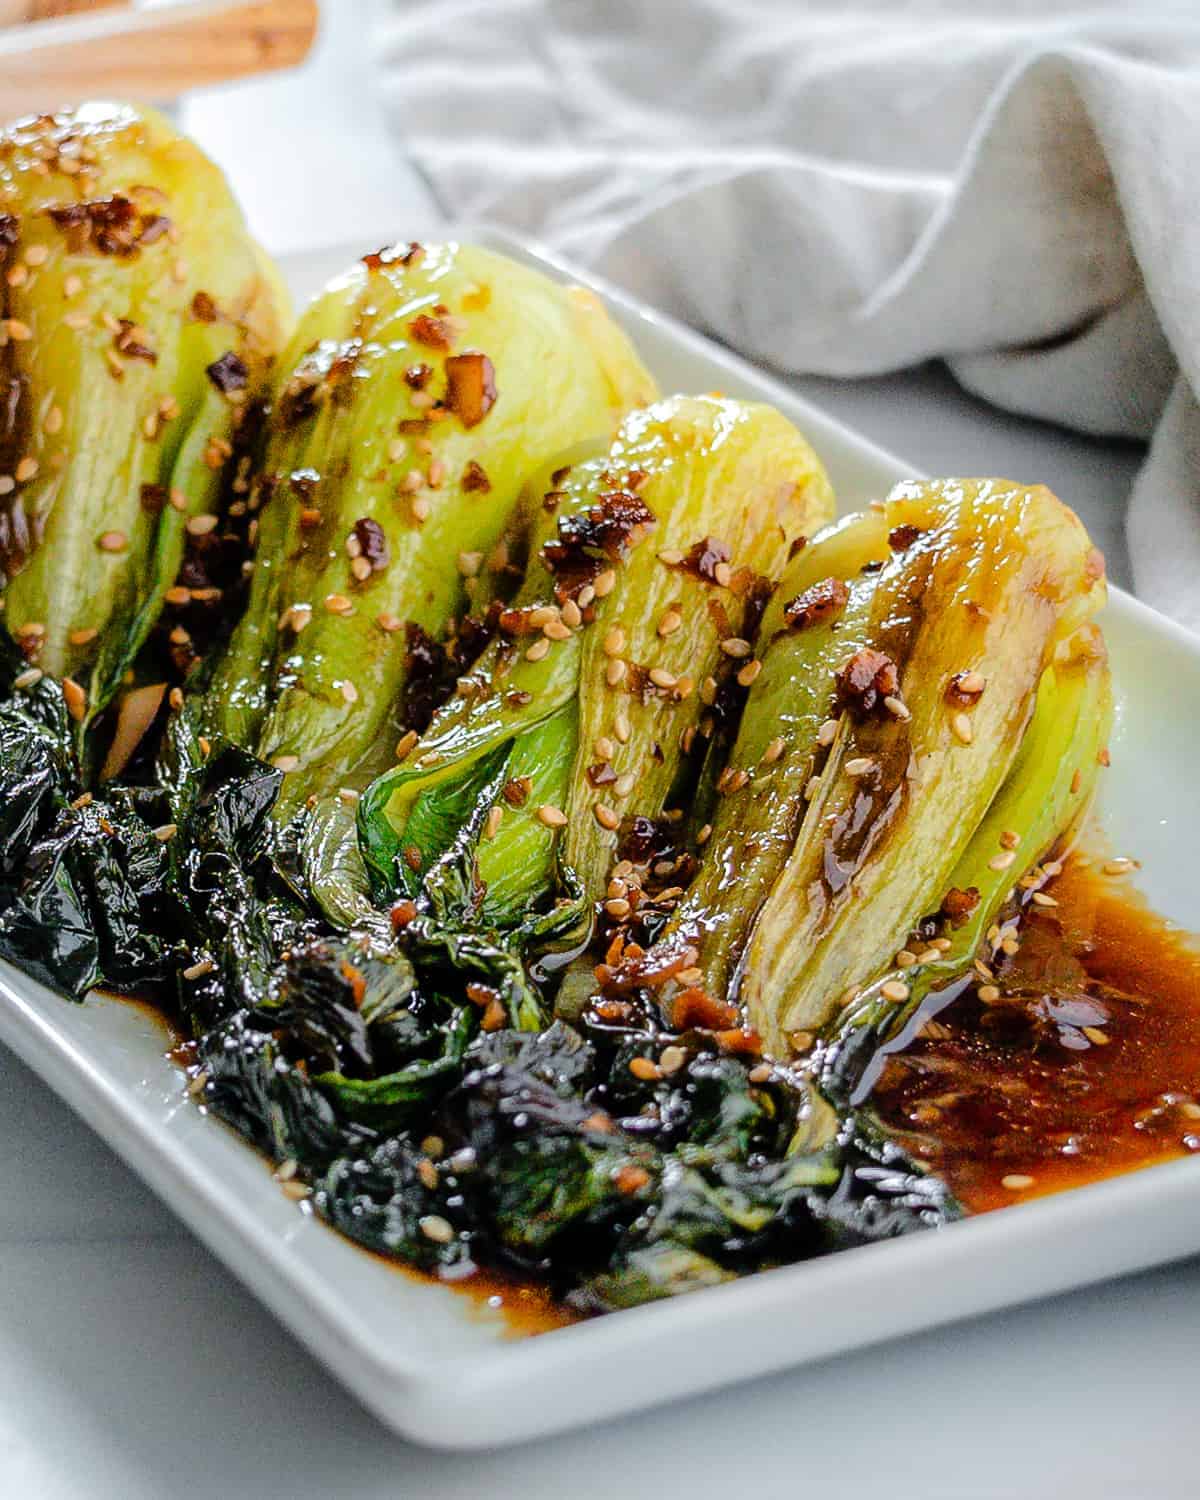 completed baby bok choy with soy sauce and garlic on a white serving tray against a white background